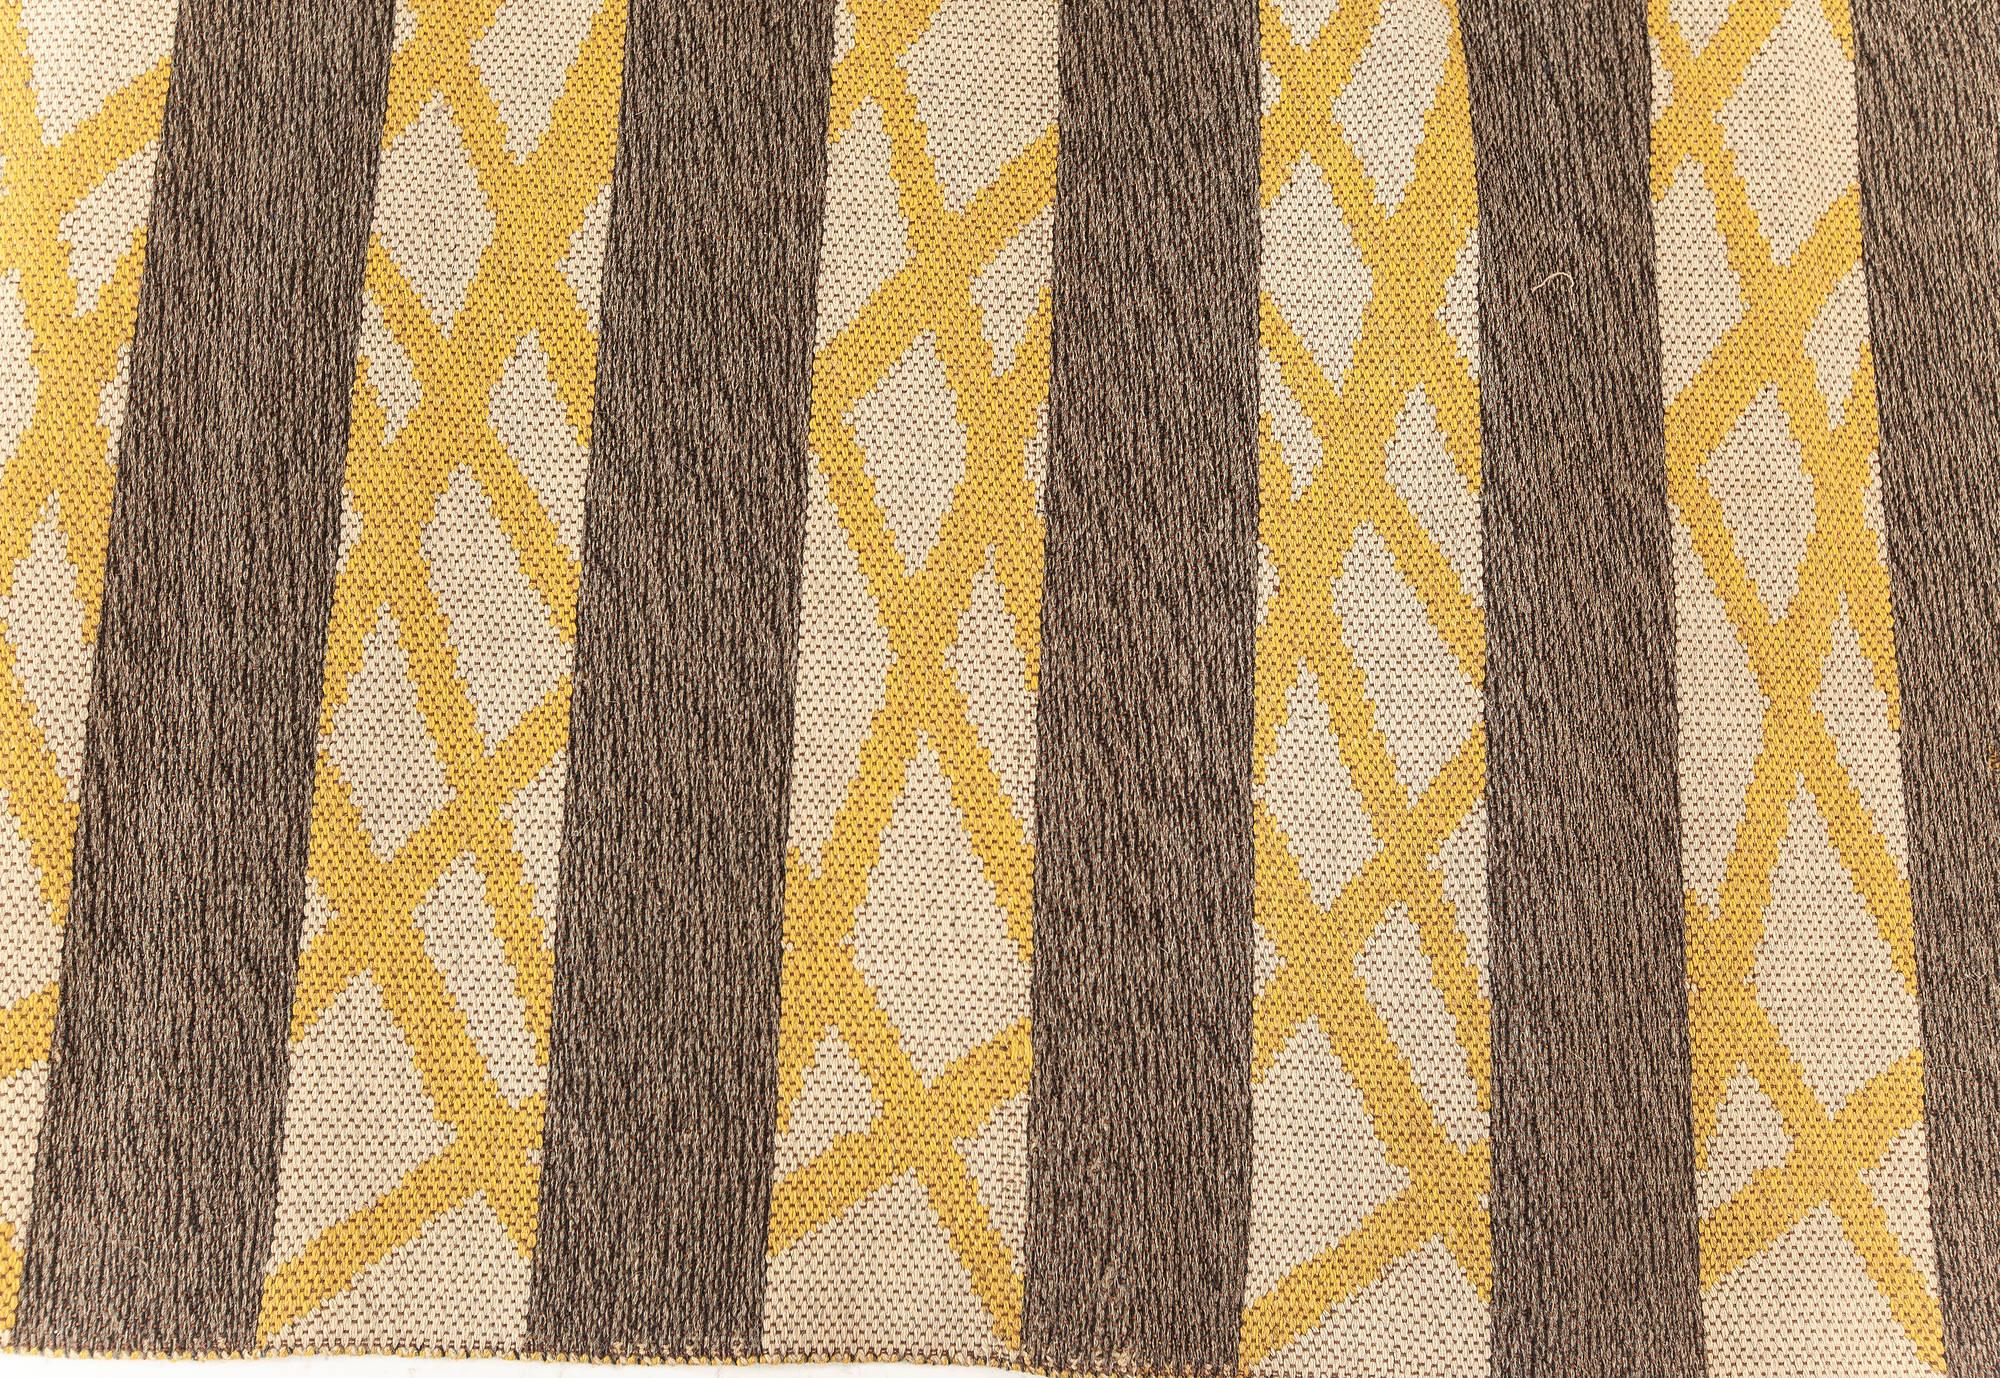 Vintage Swedish Double Sided Rug in Beige, Gray, Yellow.
Size: 4'2